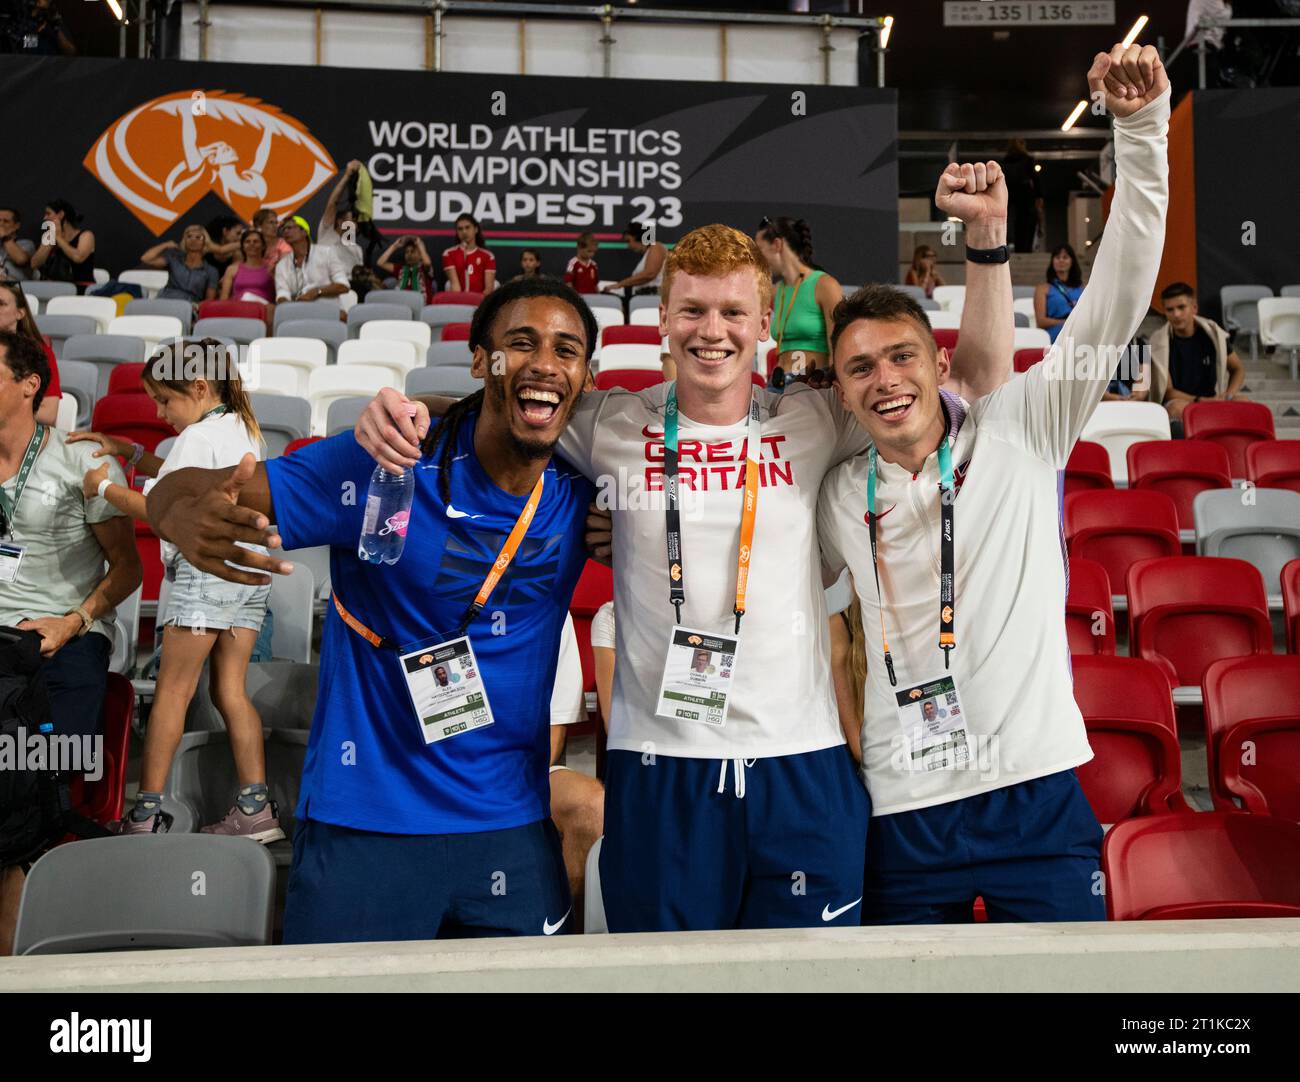 Alex Haydock-Wilson, Charles Dobson and Joe Brier of Great Britain celebrate after there team win silver in the mixed 4x400m relay at the World Athlet Stock Photo